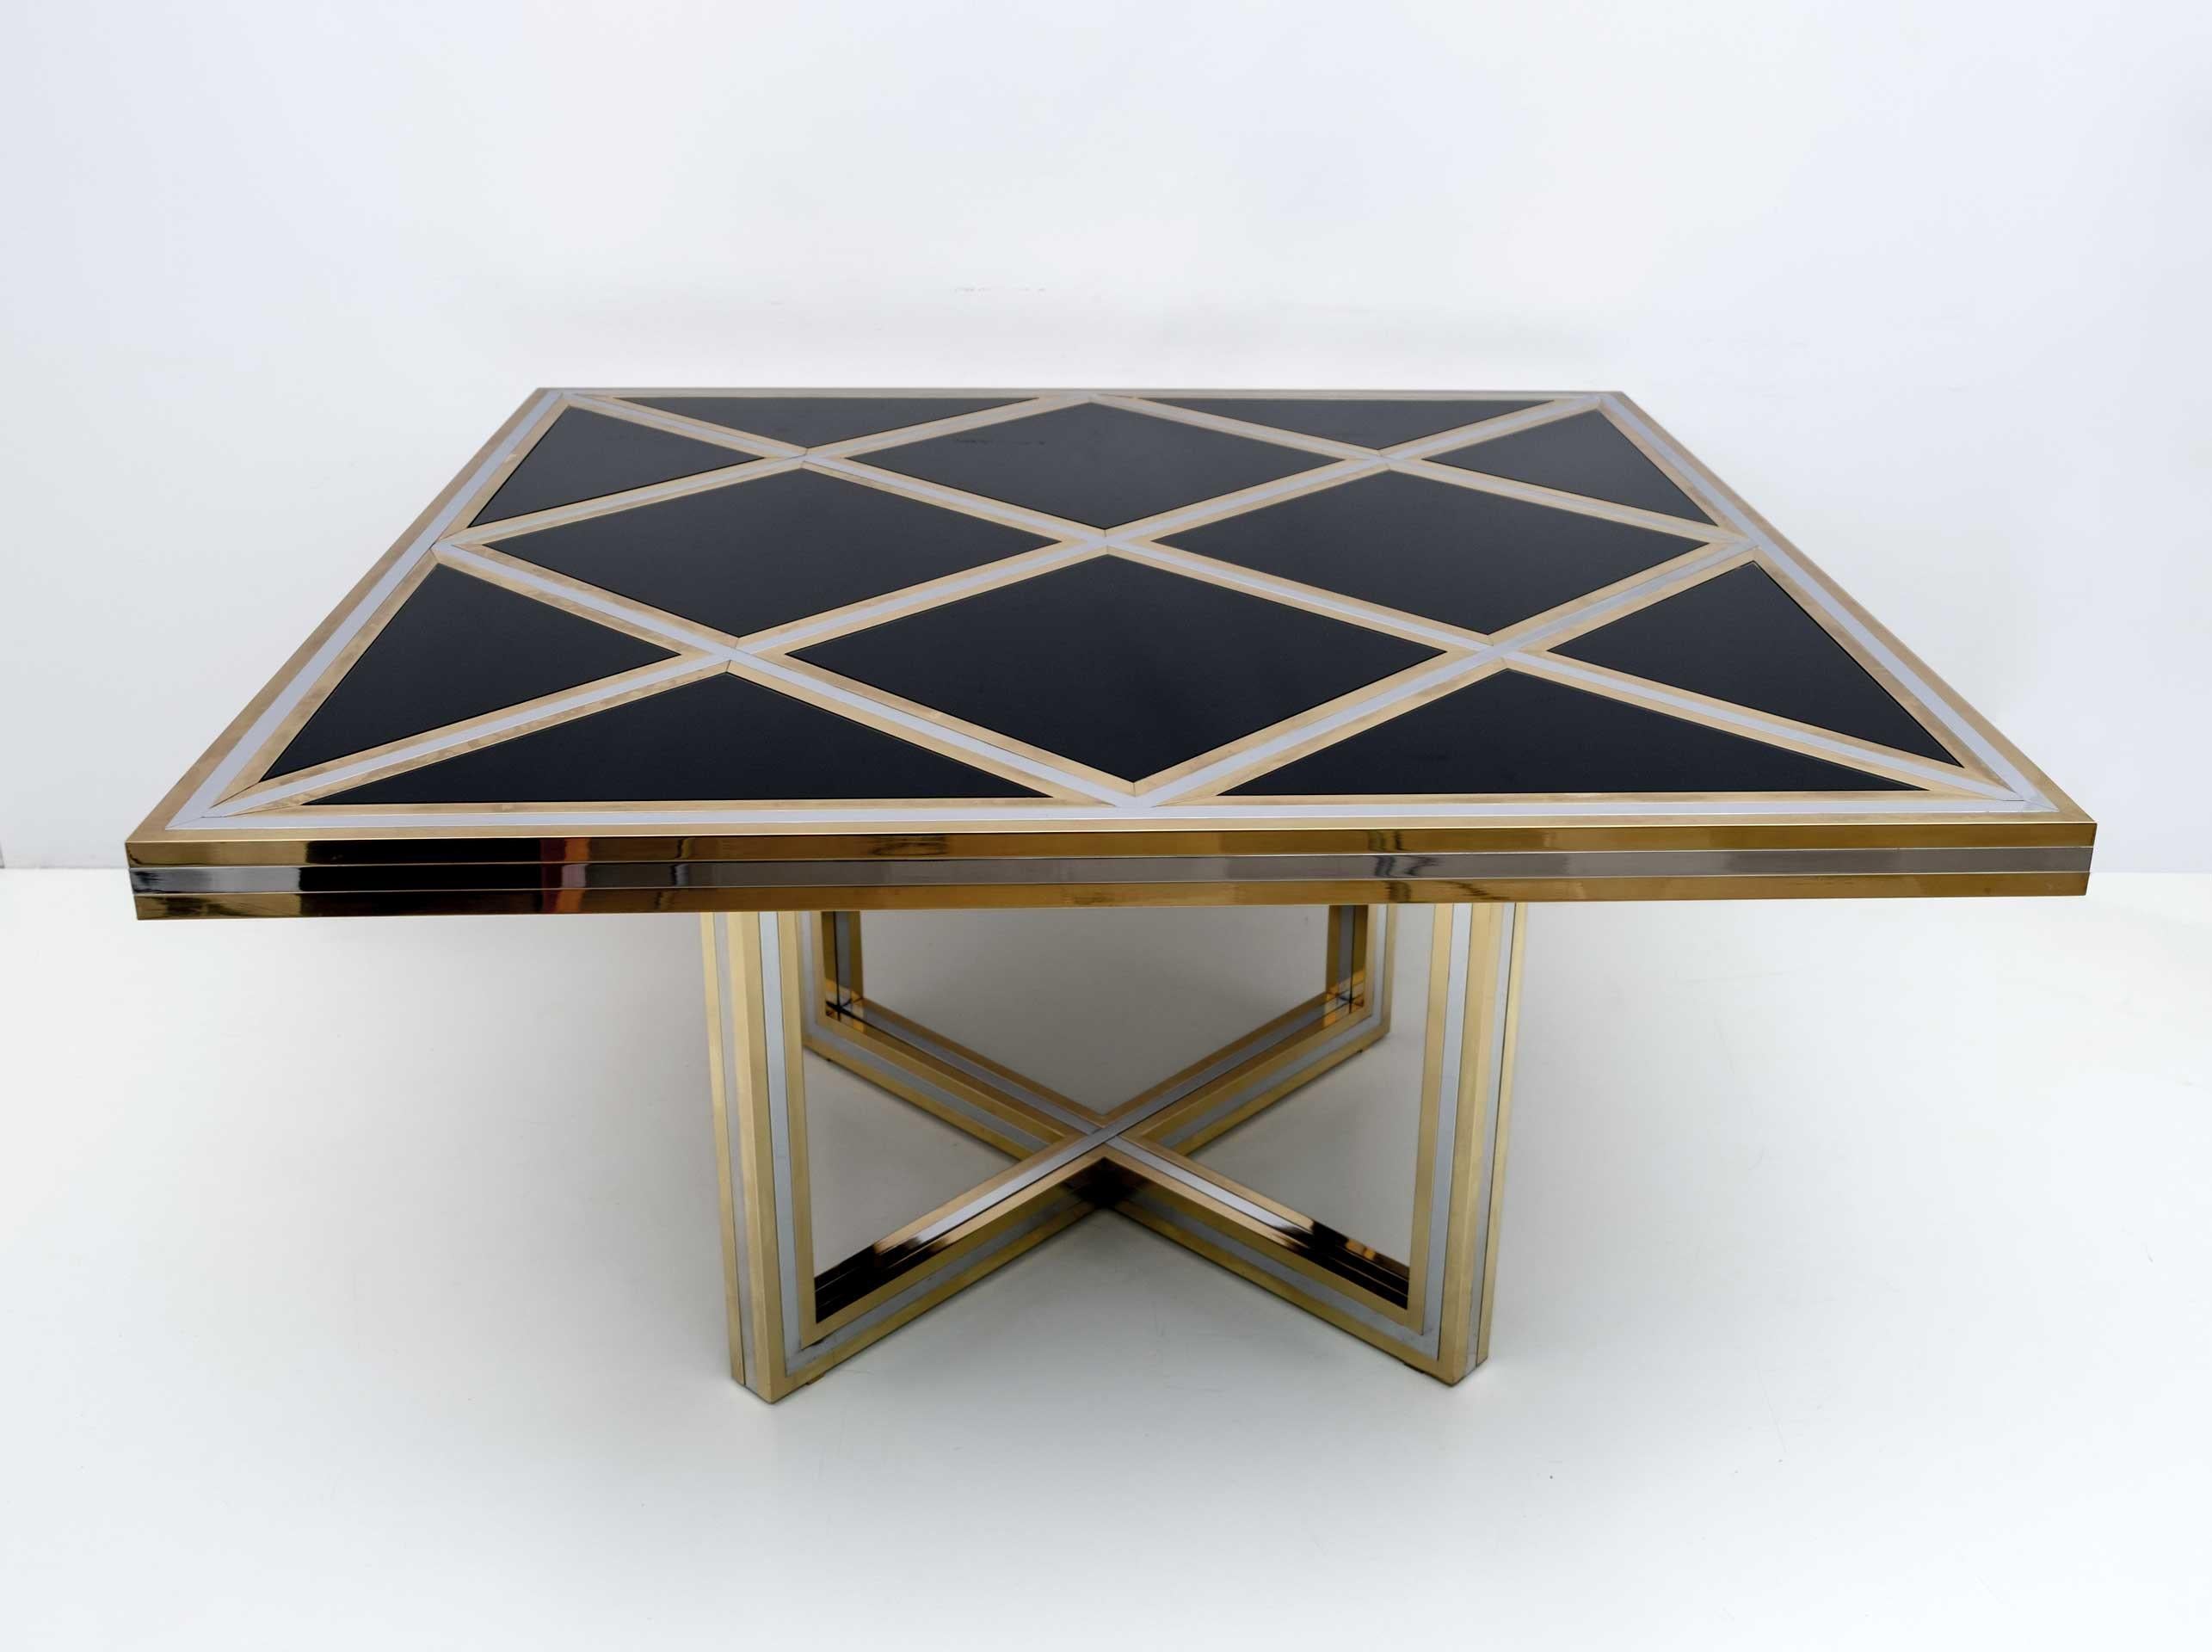 An intriguing designer piece, this large dining table deserves to be the focal point of your dining room. Symmetrical brass and chrome elements strike through a black glass top, the result is a stunningly elegant centerpiece for the dining room.